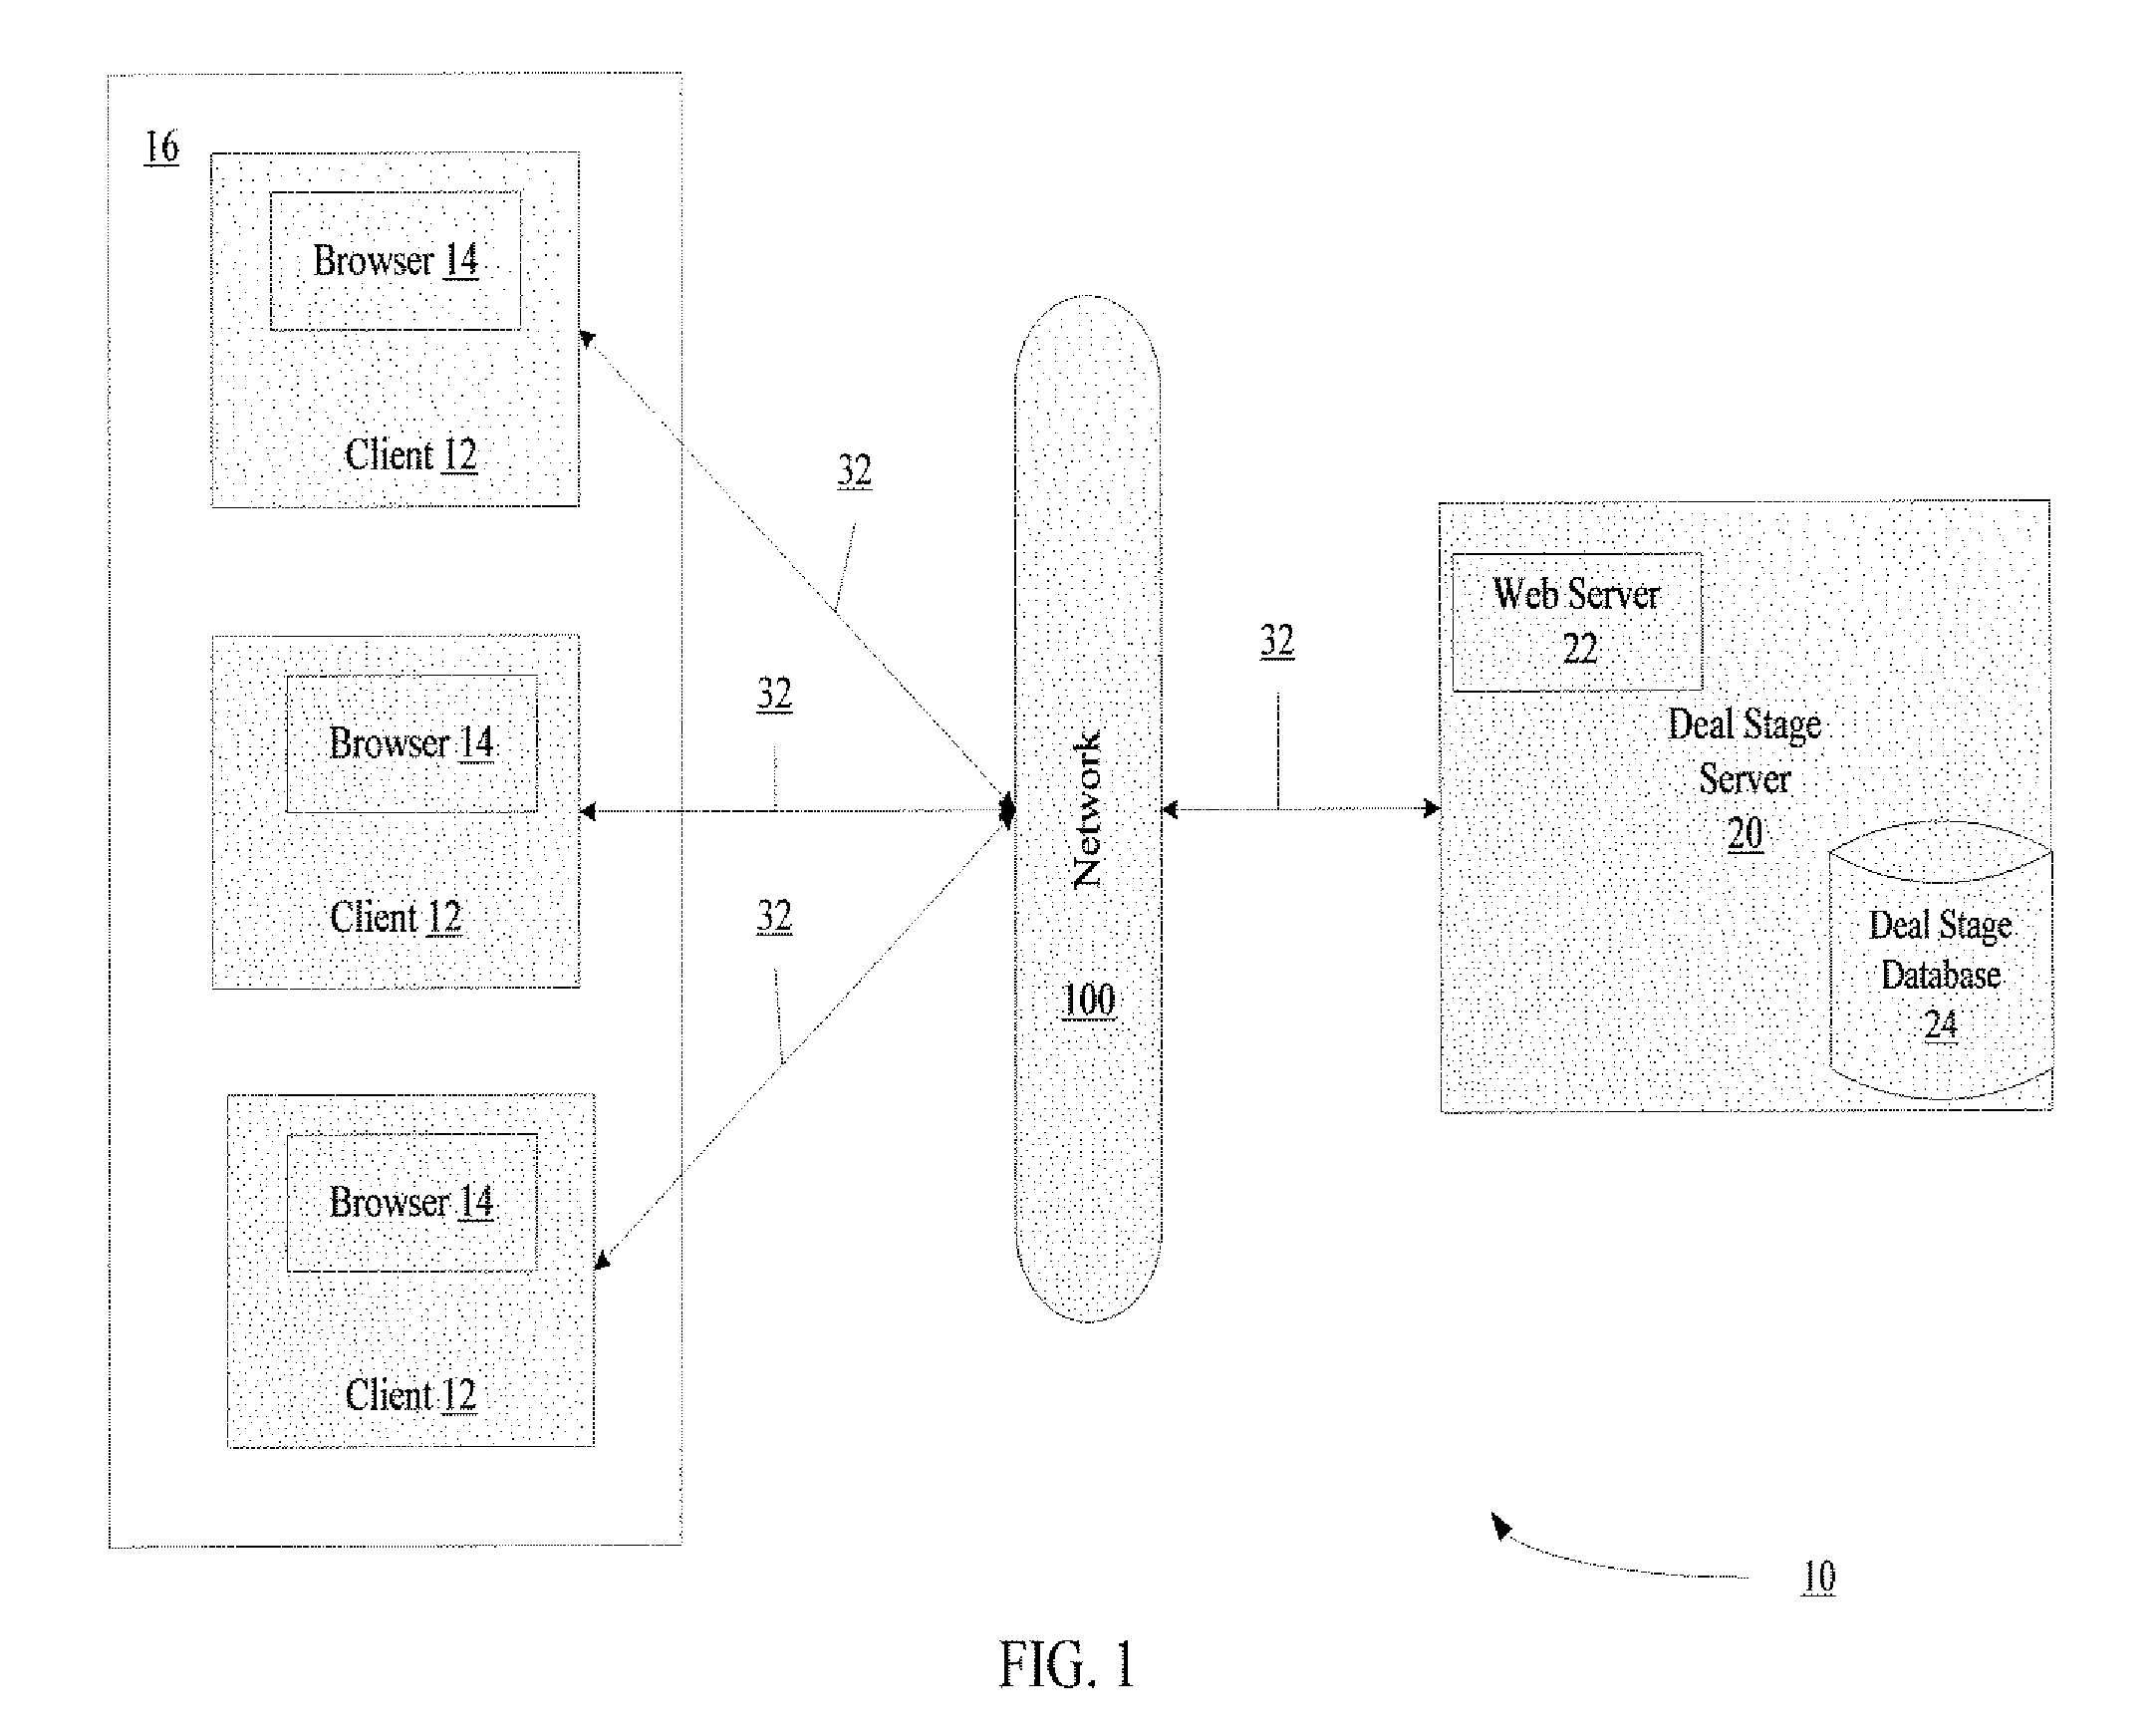 Managing signature pages of a transactional deal using a taxonomy displayable by a computing device